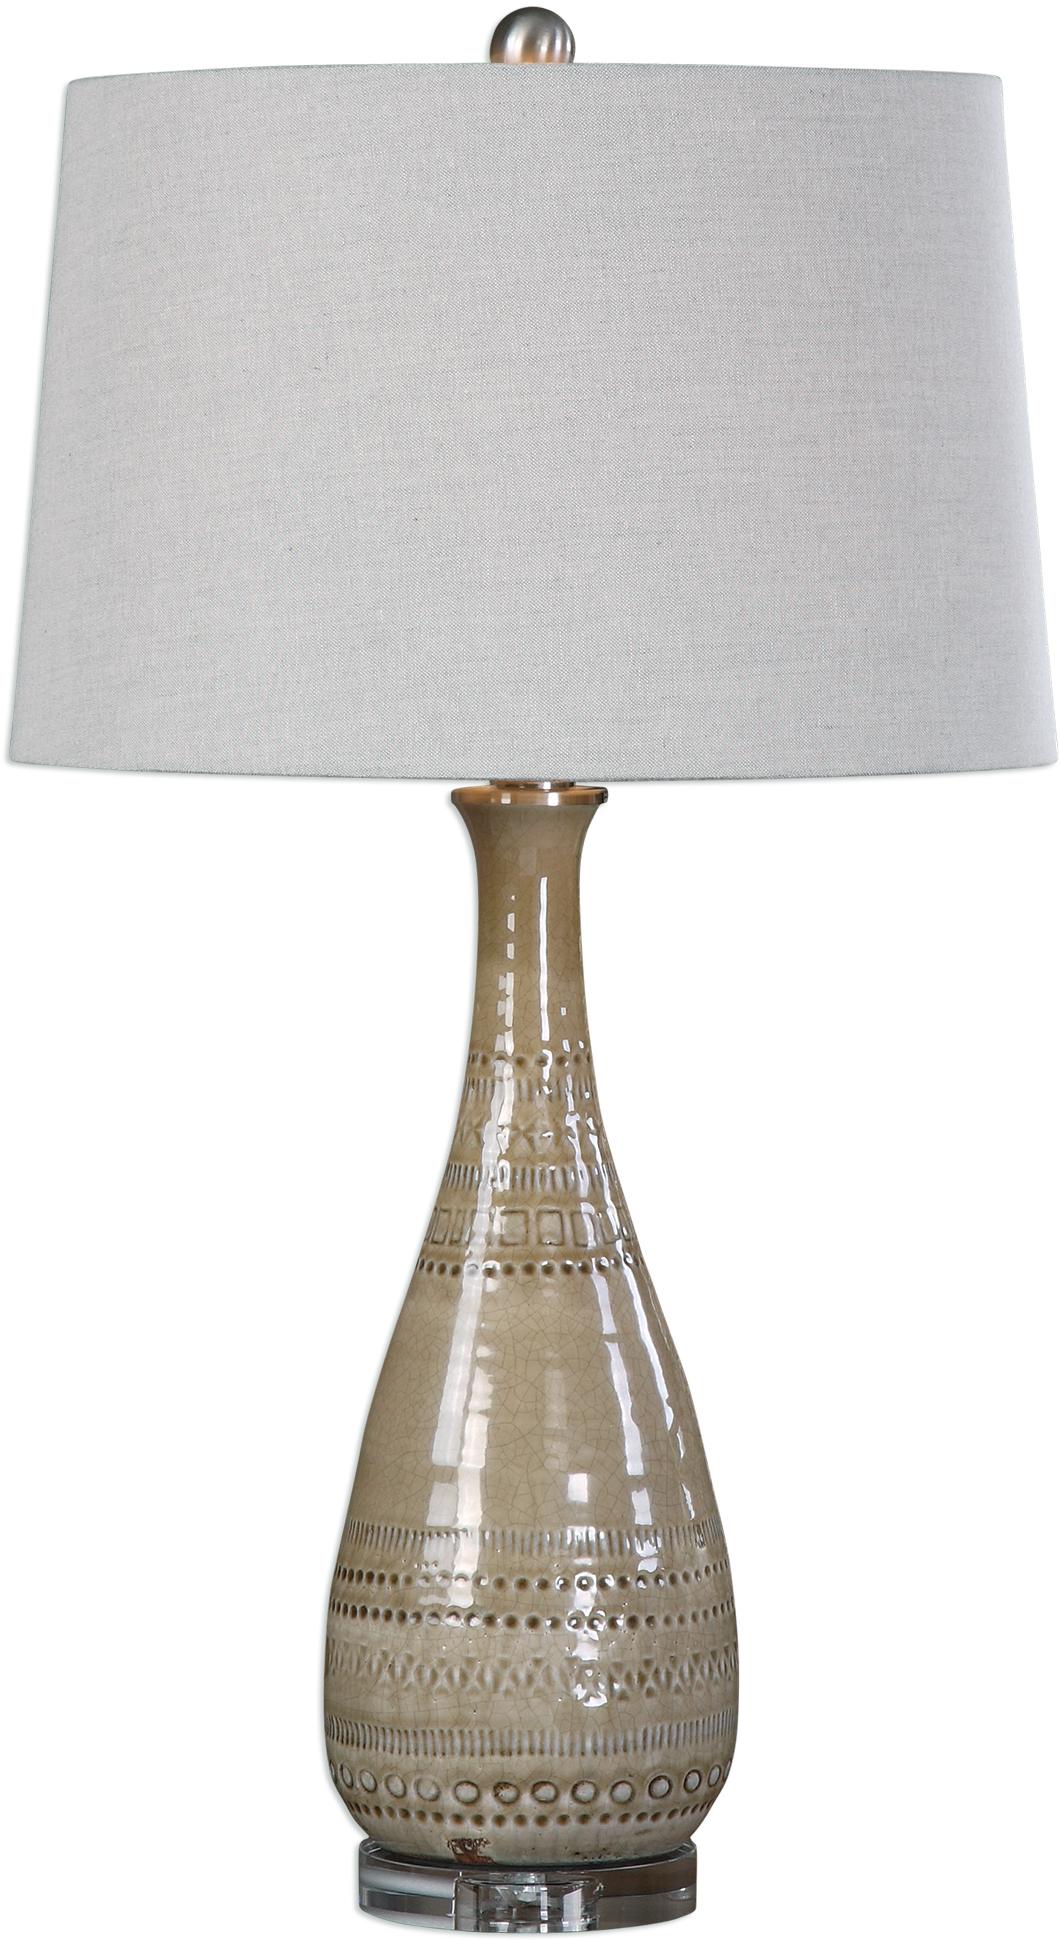 Uttermost Co S On Dailymail, Uttermost Bones Stone Ivory Table Lamp